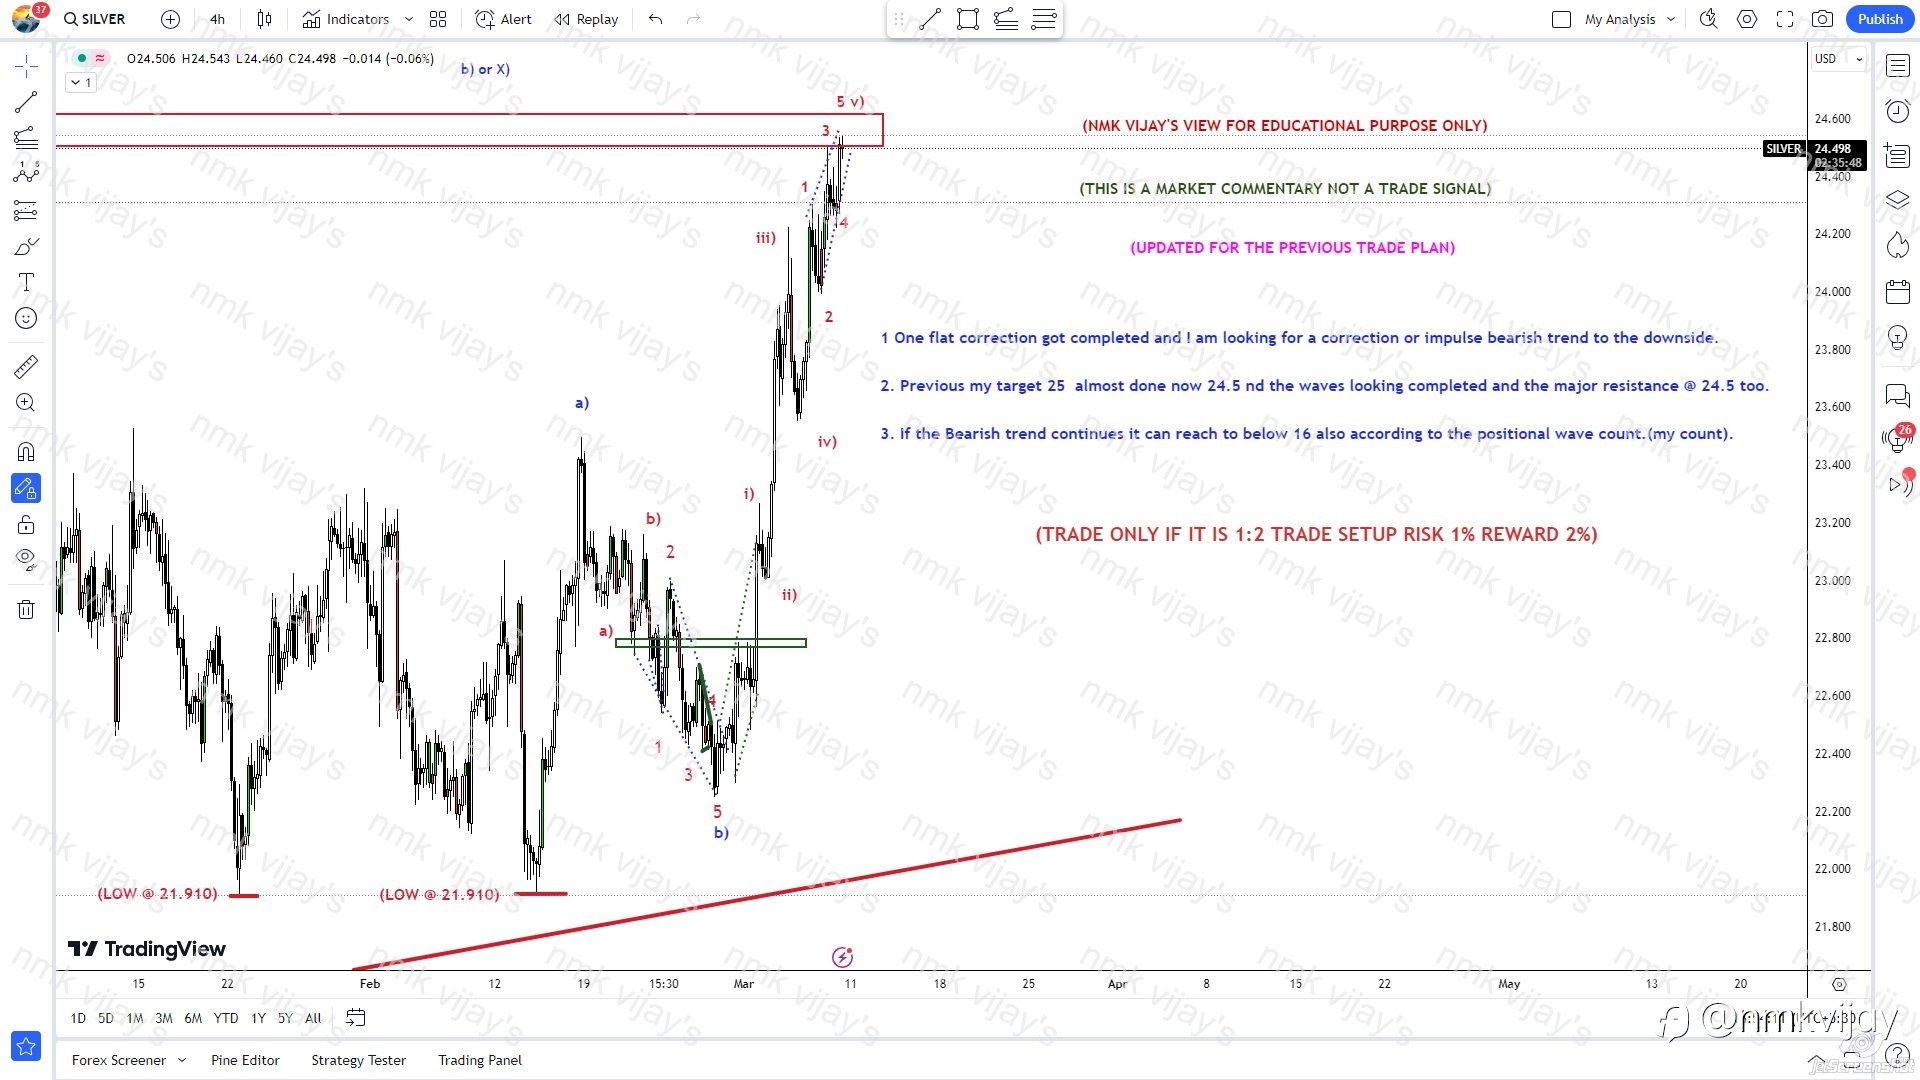 SILVER: Target Almost Done now to 16 ?